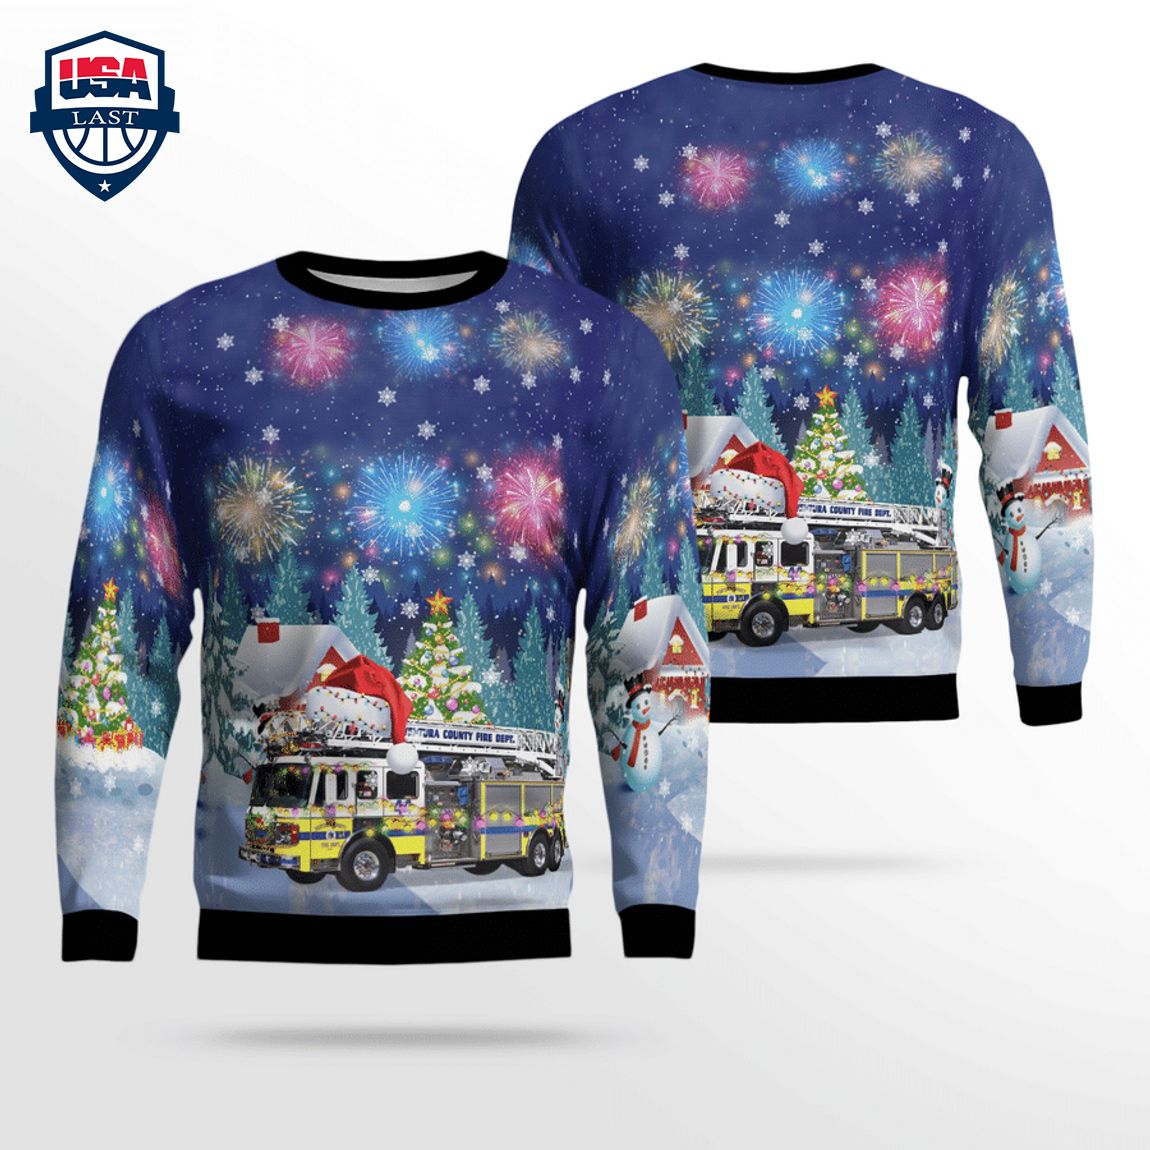 Ventura County Fire Department 3D Christmas Sweater - Looking so nice